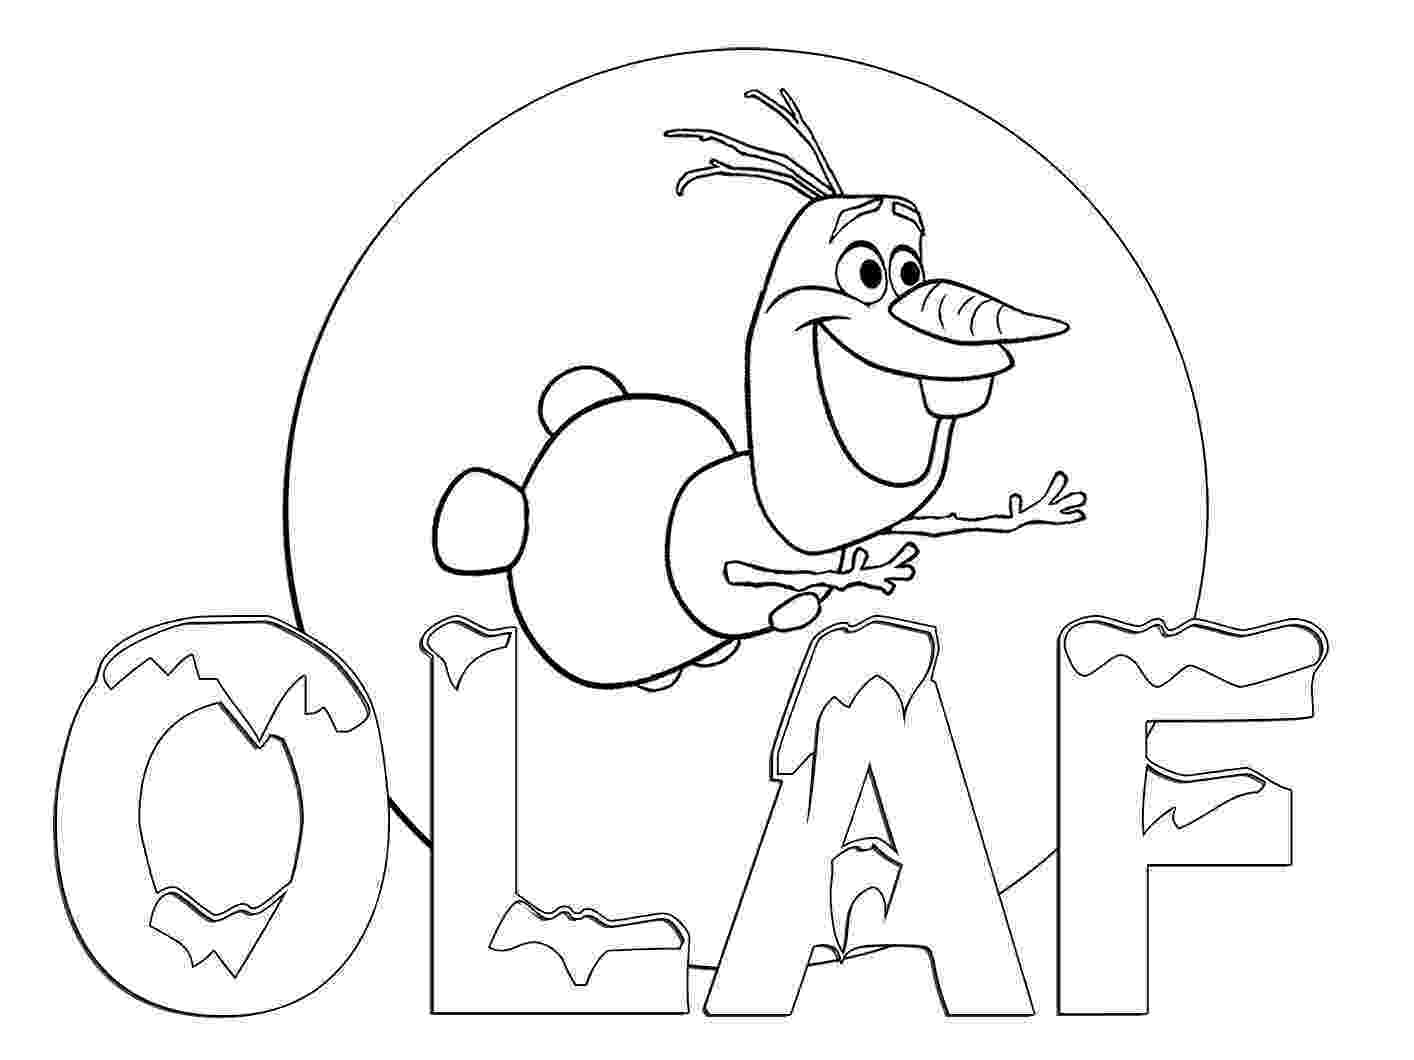 frozen images to color free printable frozen coloring pages for kids best frozen color to images 